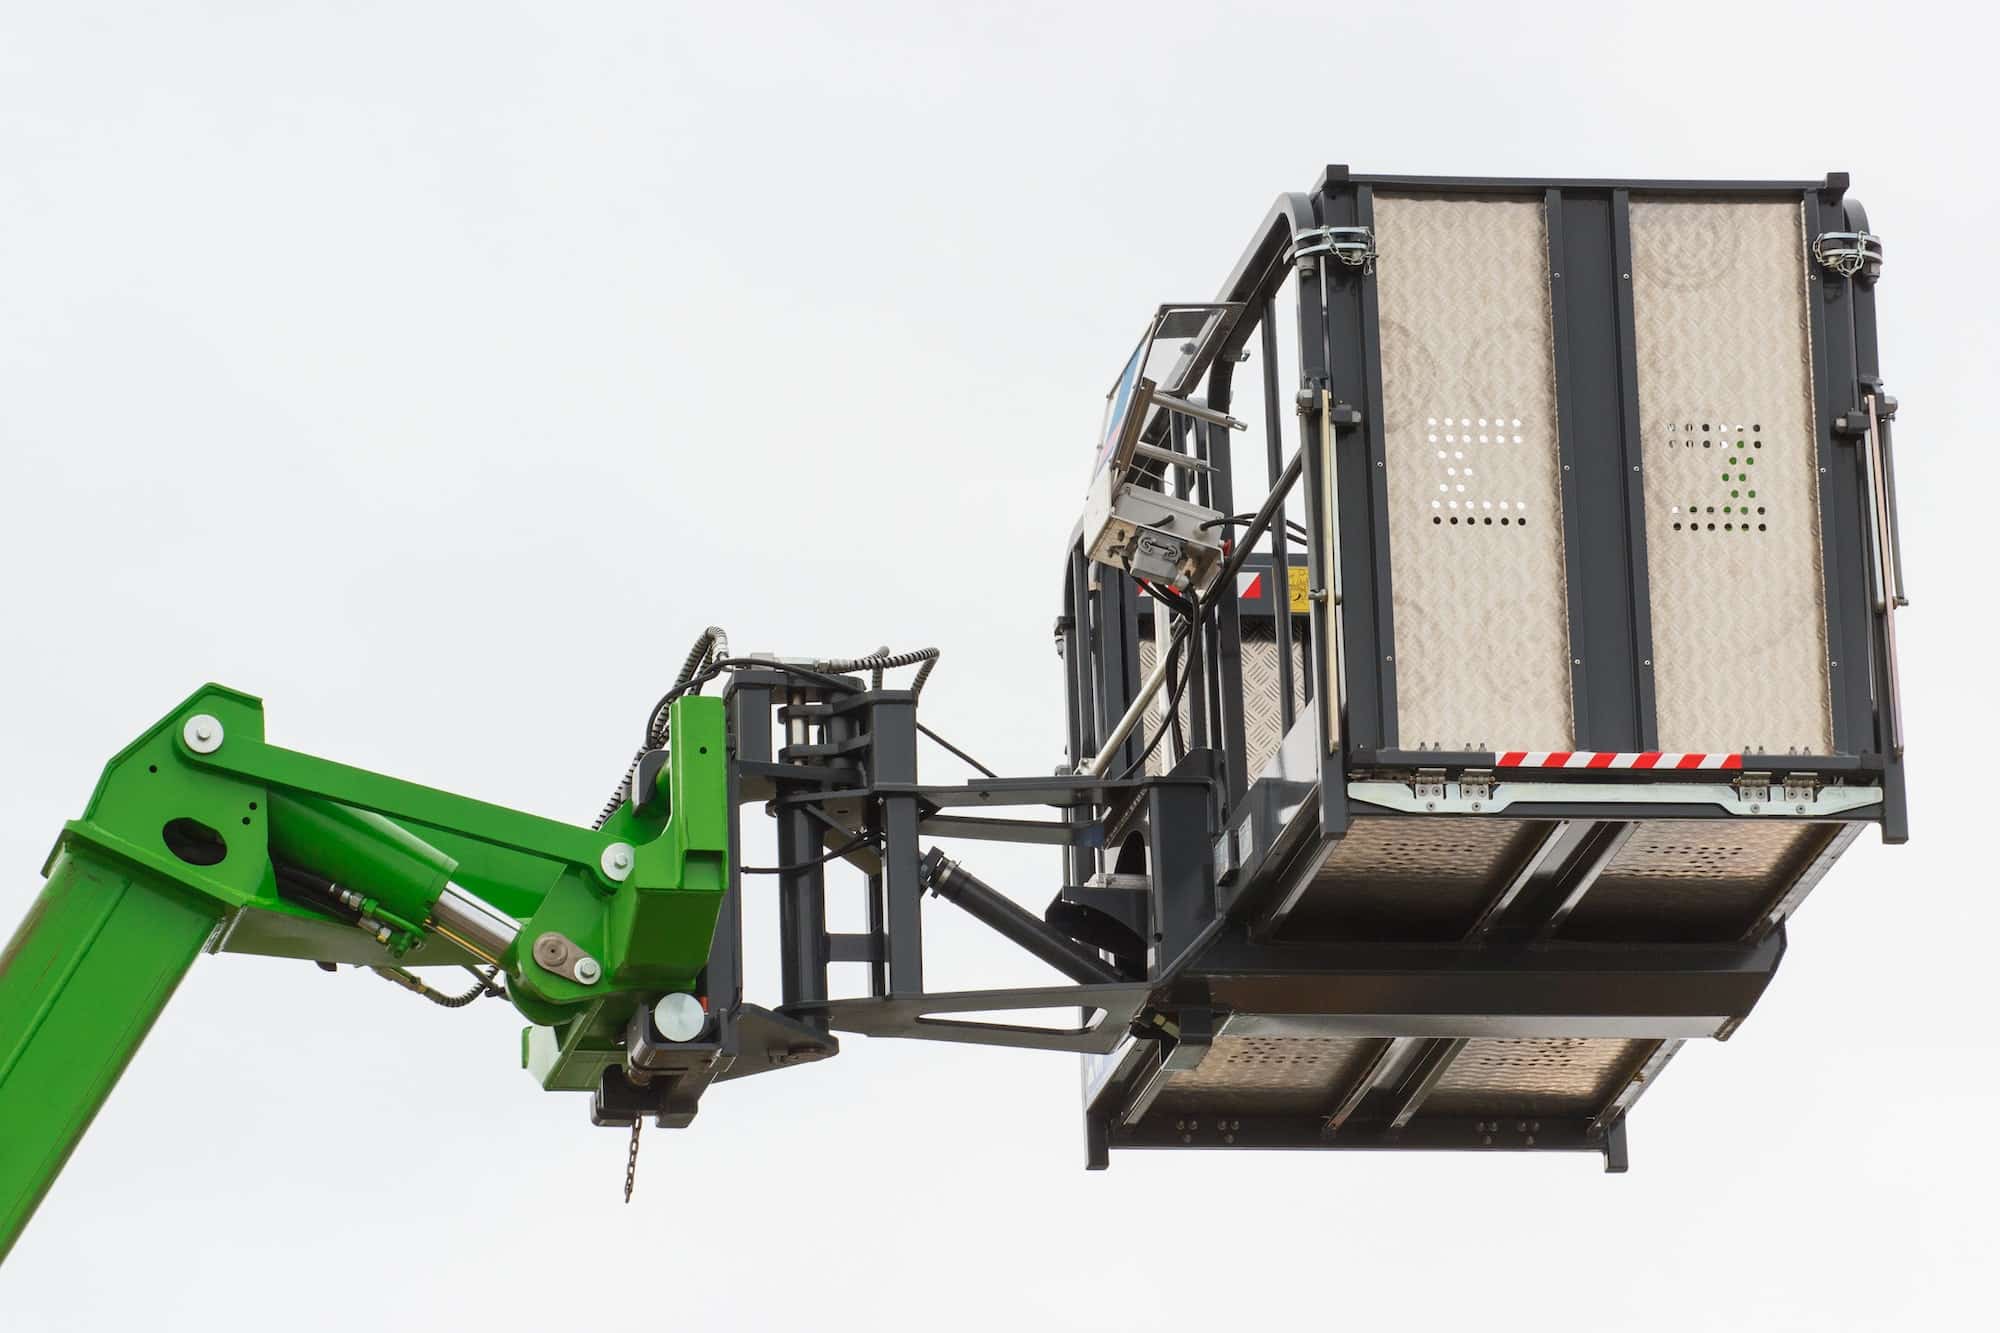 Hydraulic platform or elevator using for transport different things. Industrial technology